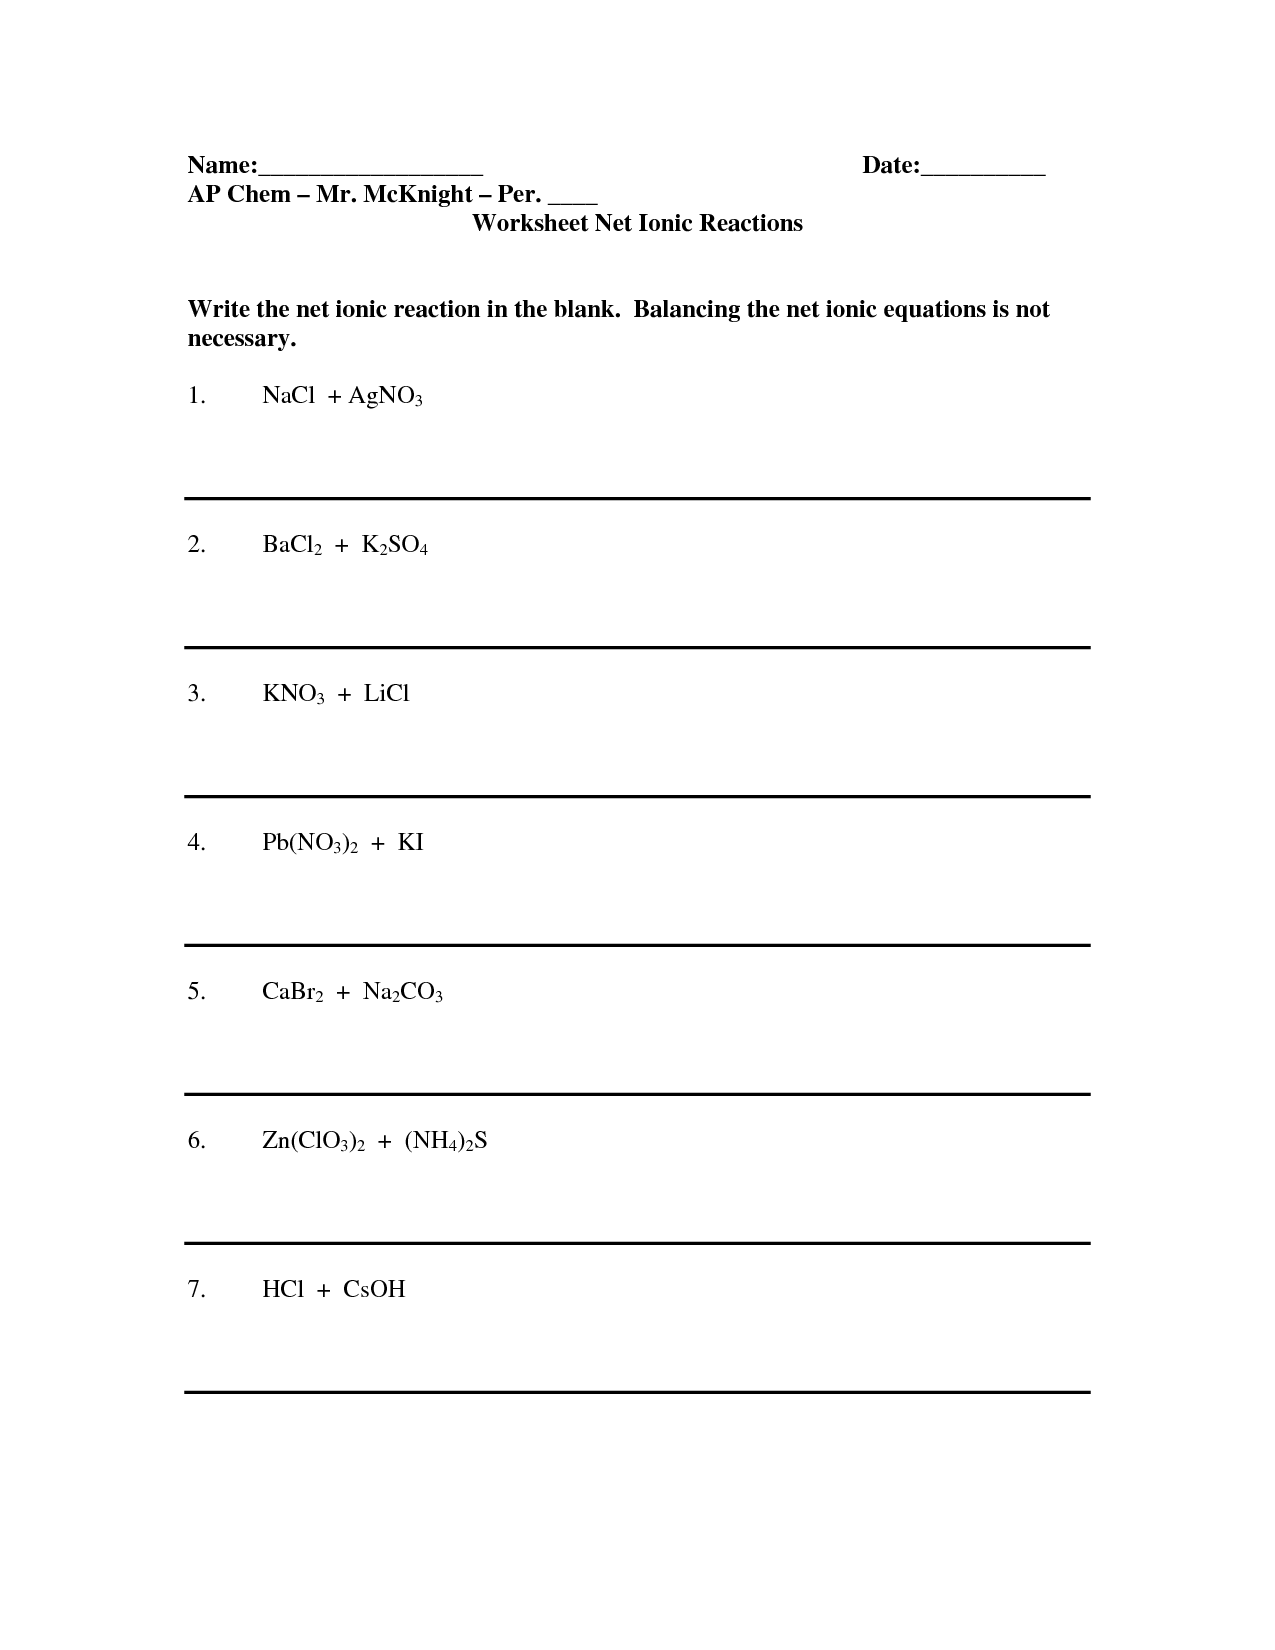 7-best-images-of-writing-balanced-equations-worksheet-balanced-net-ionic-equation-net-ionic